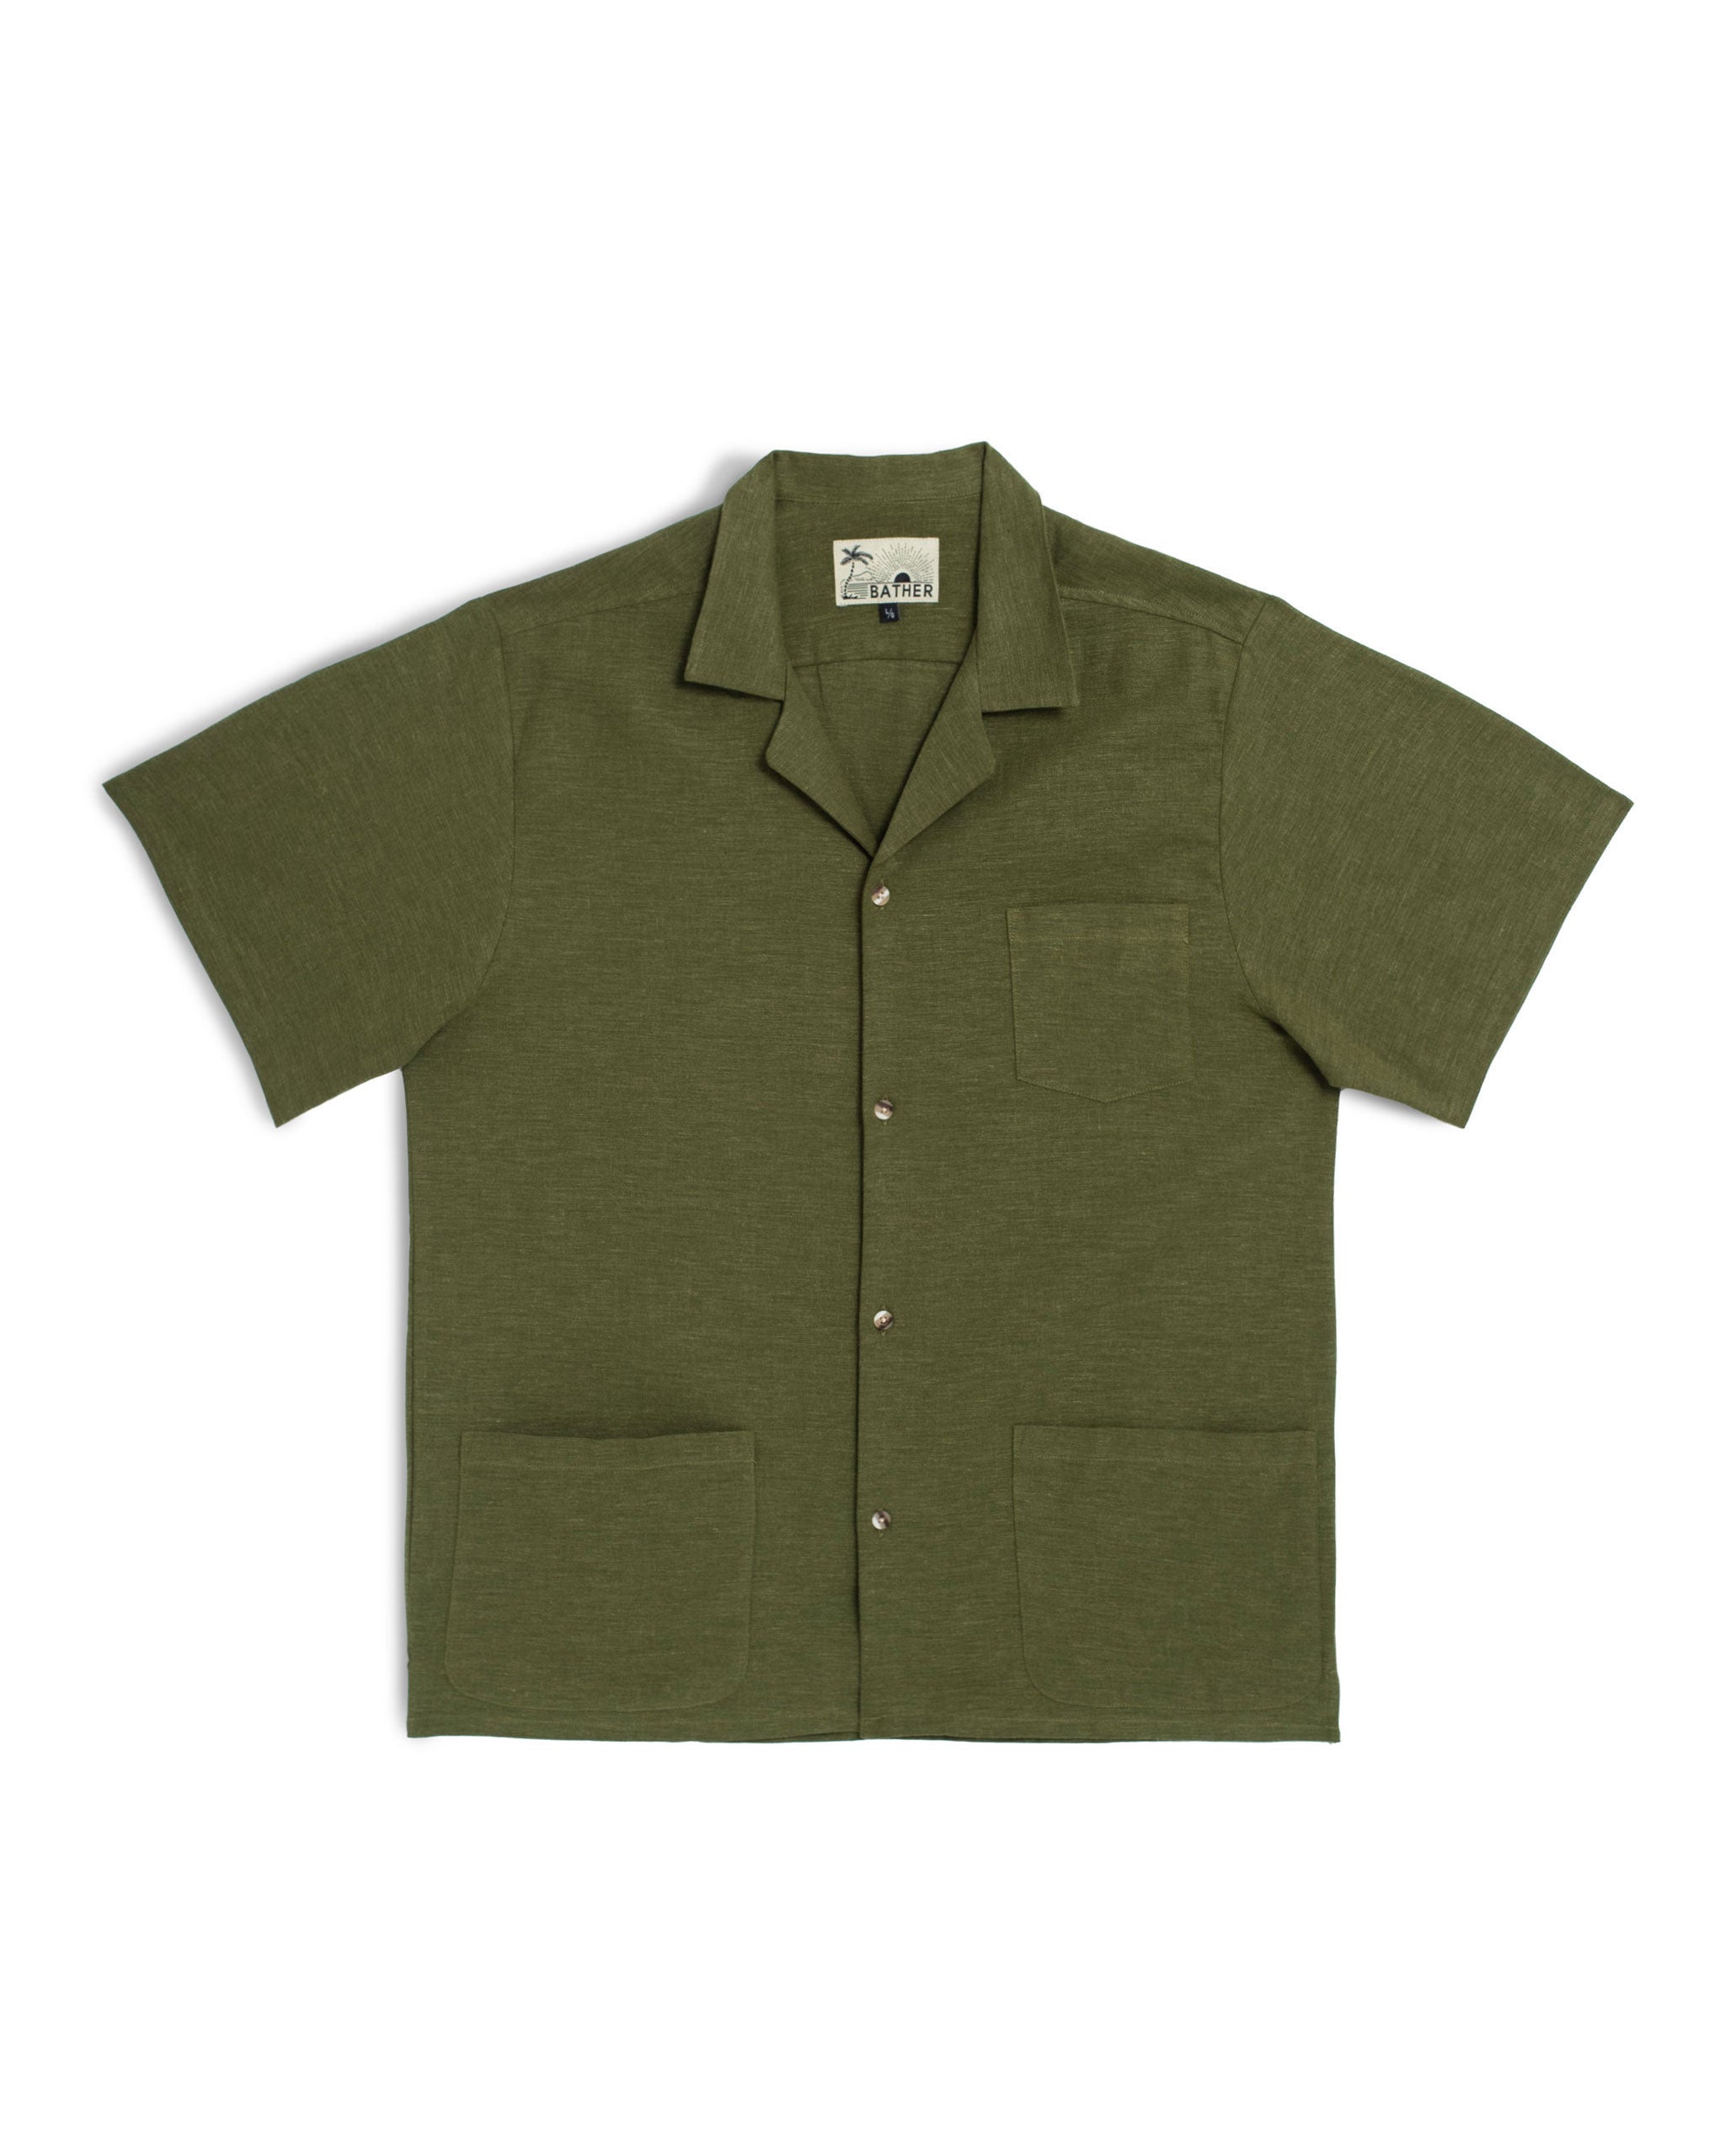 An olive green linen camp shirt with a chest pocket and two lower pockets on the front